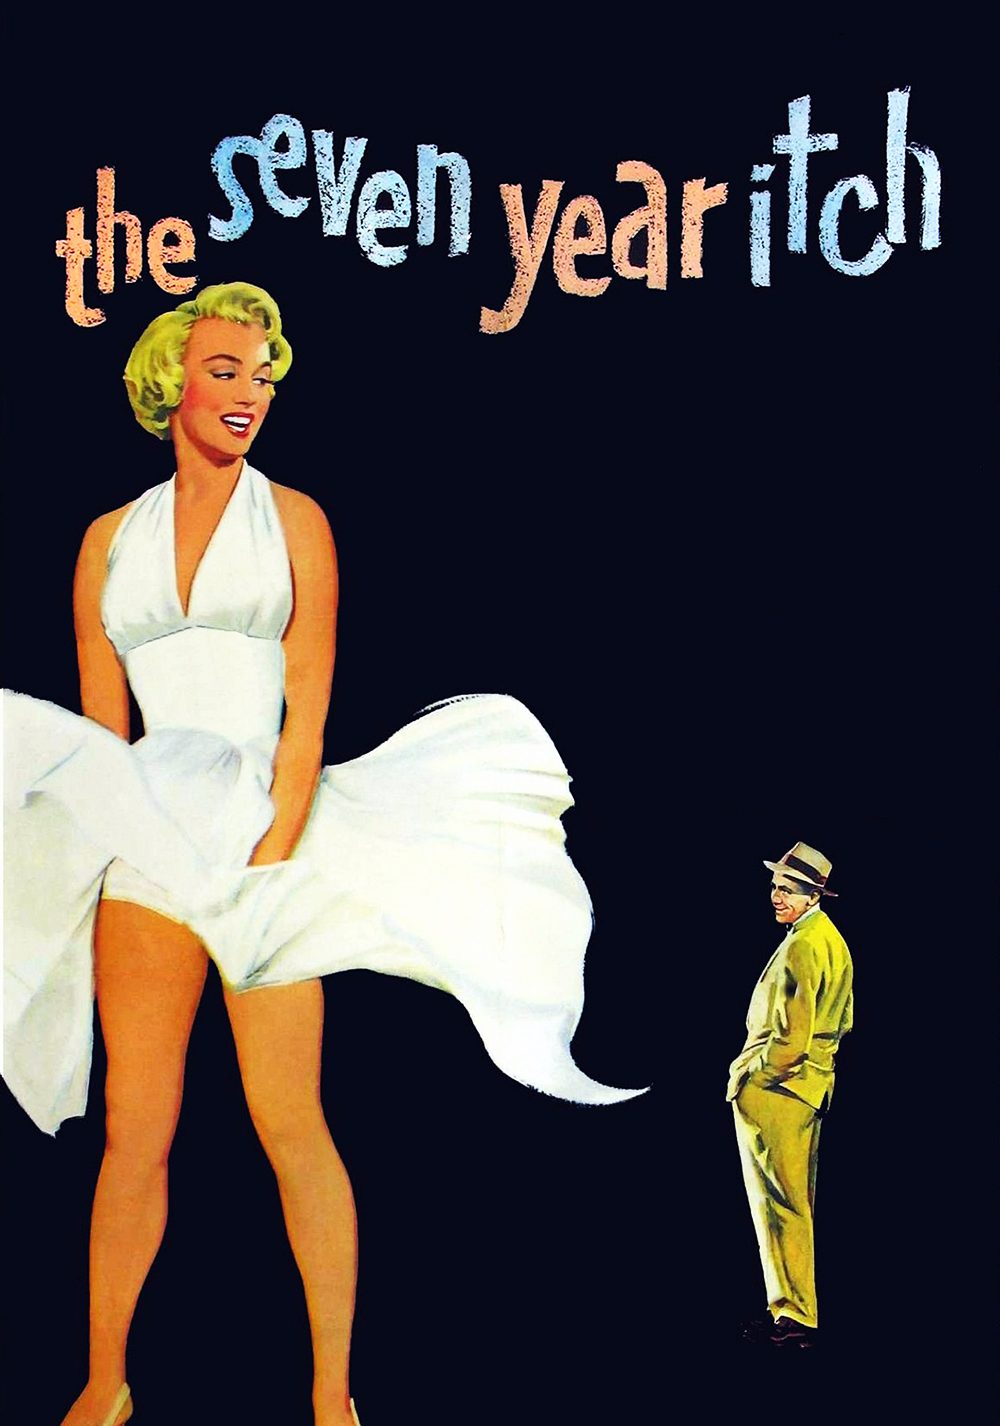 The Seven Year Itch Picture